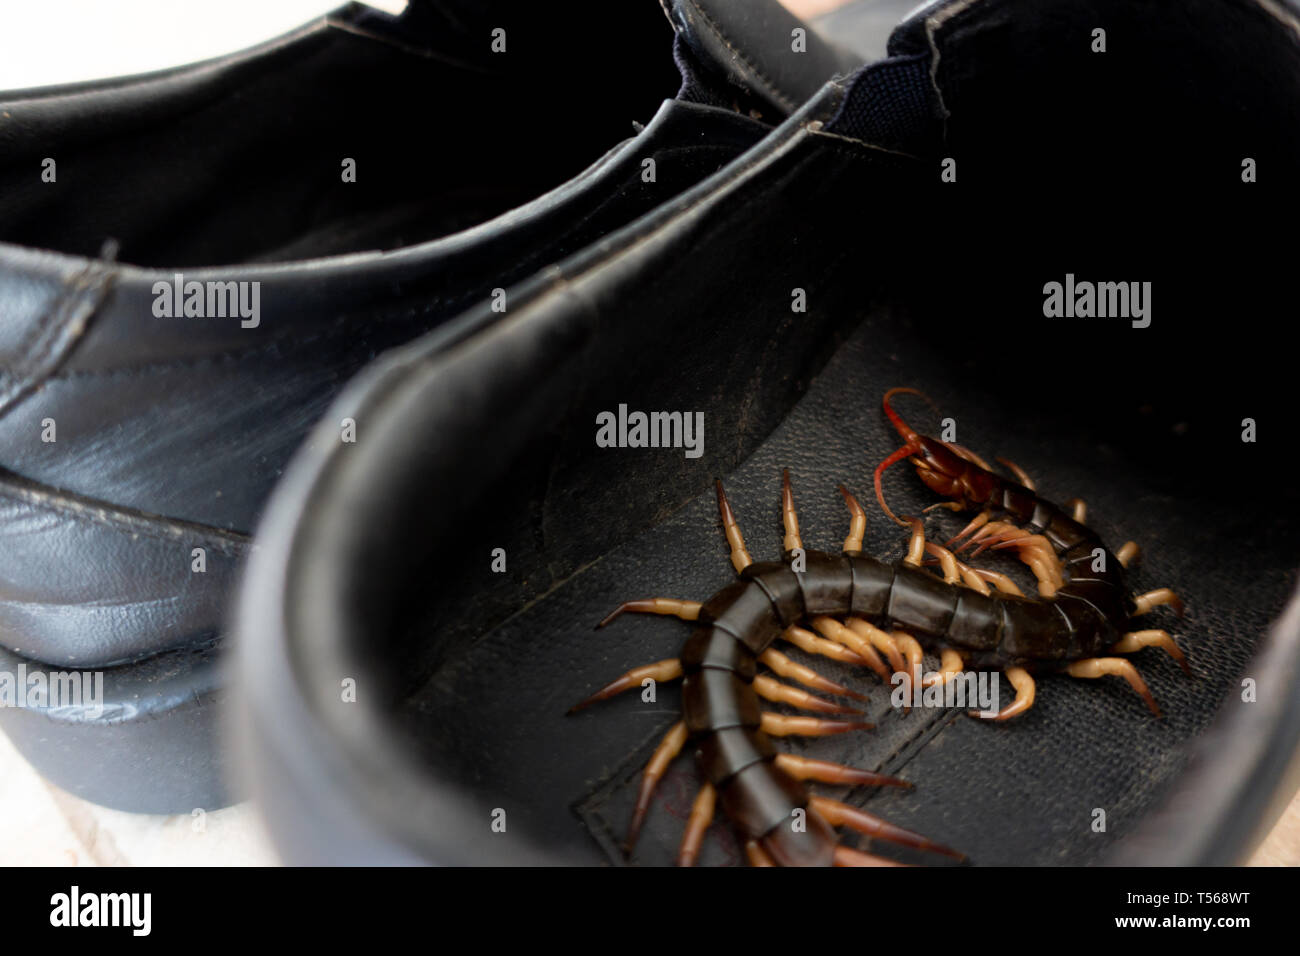 giant centipedes hiding in black ,leather shoes Stock Photo